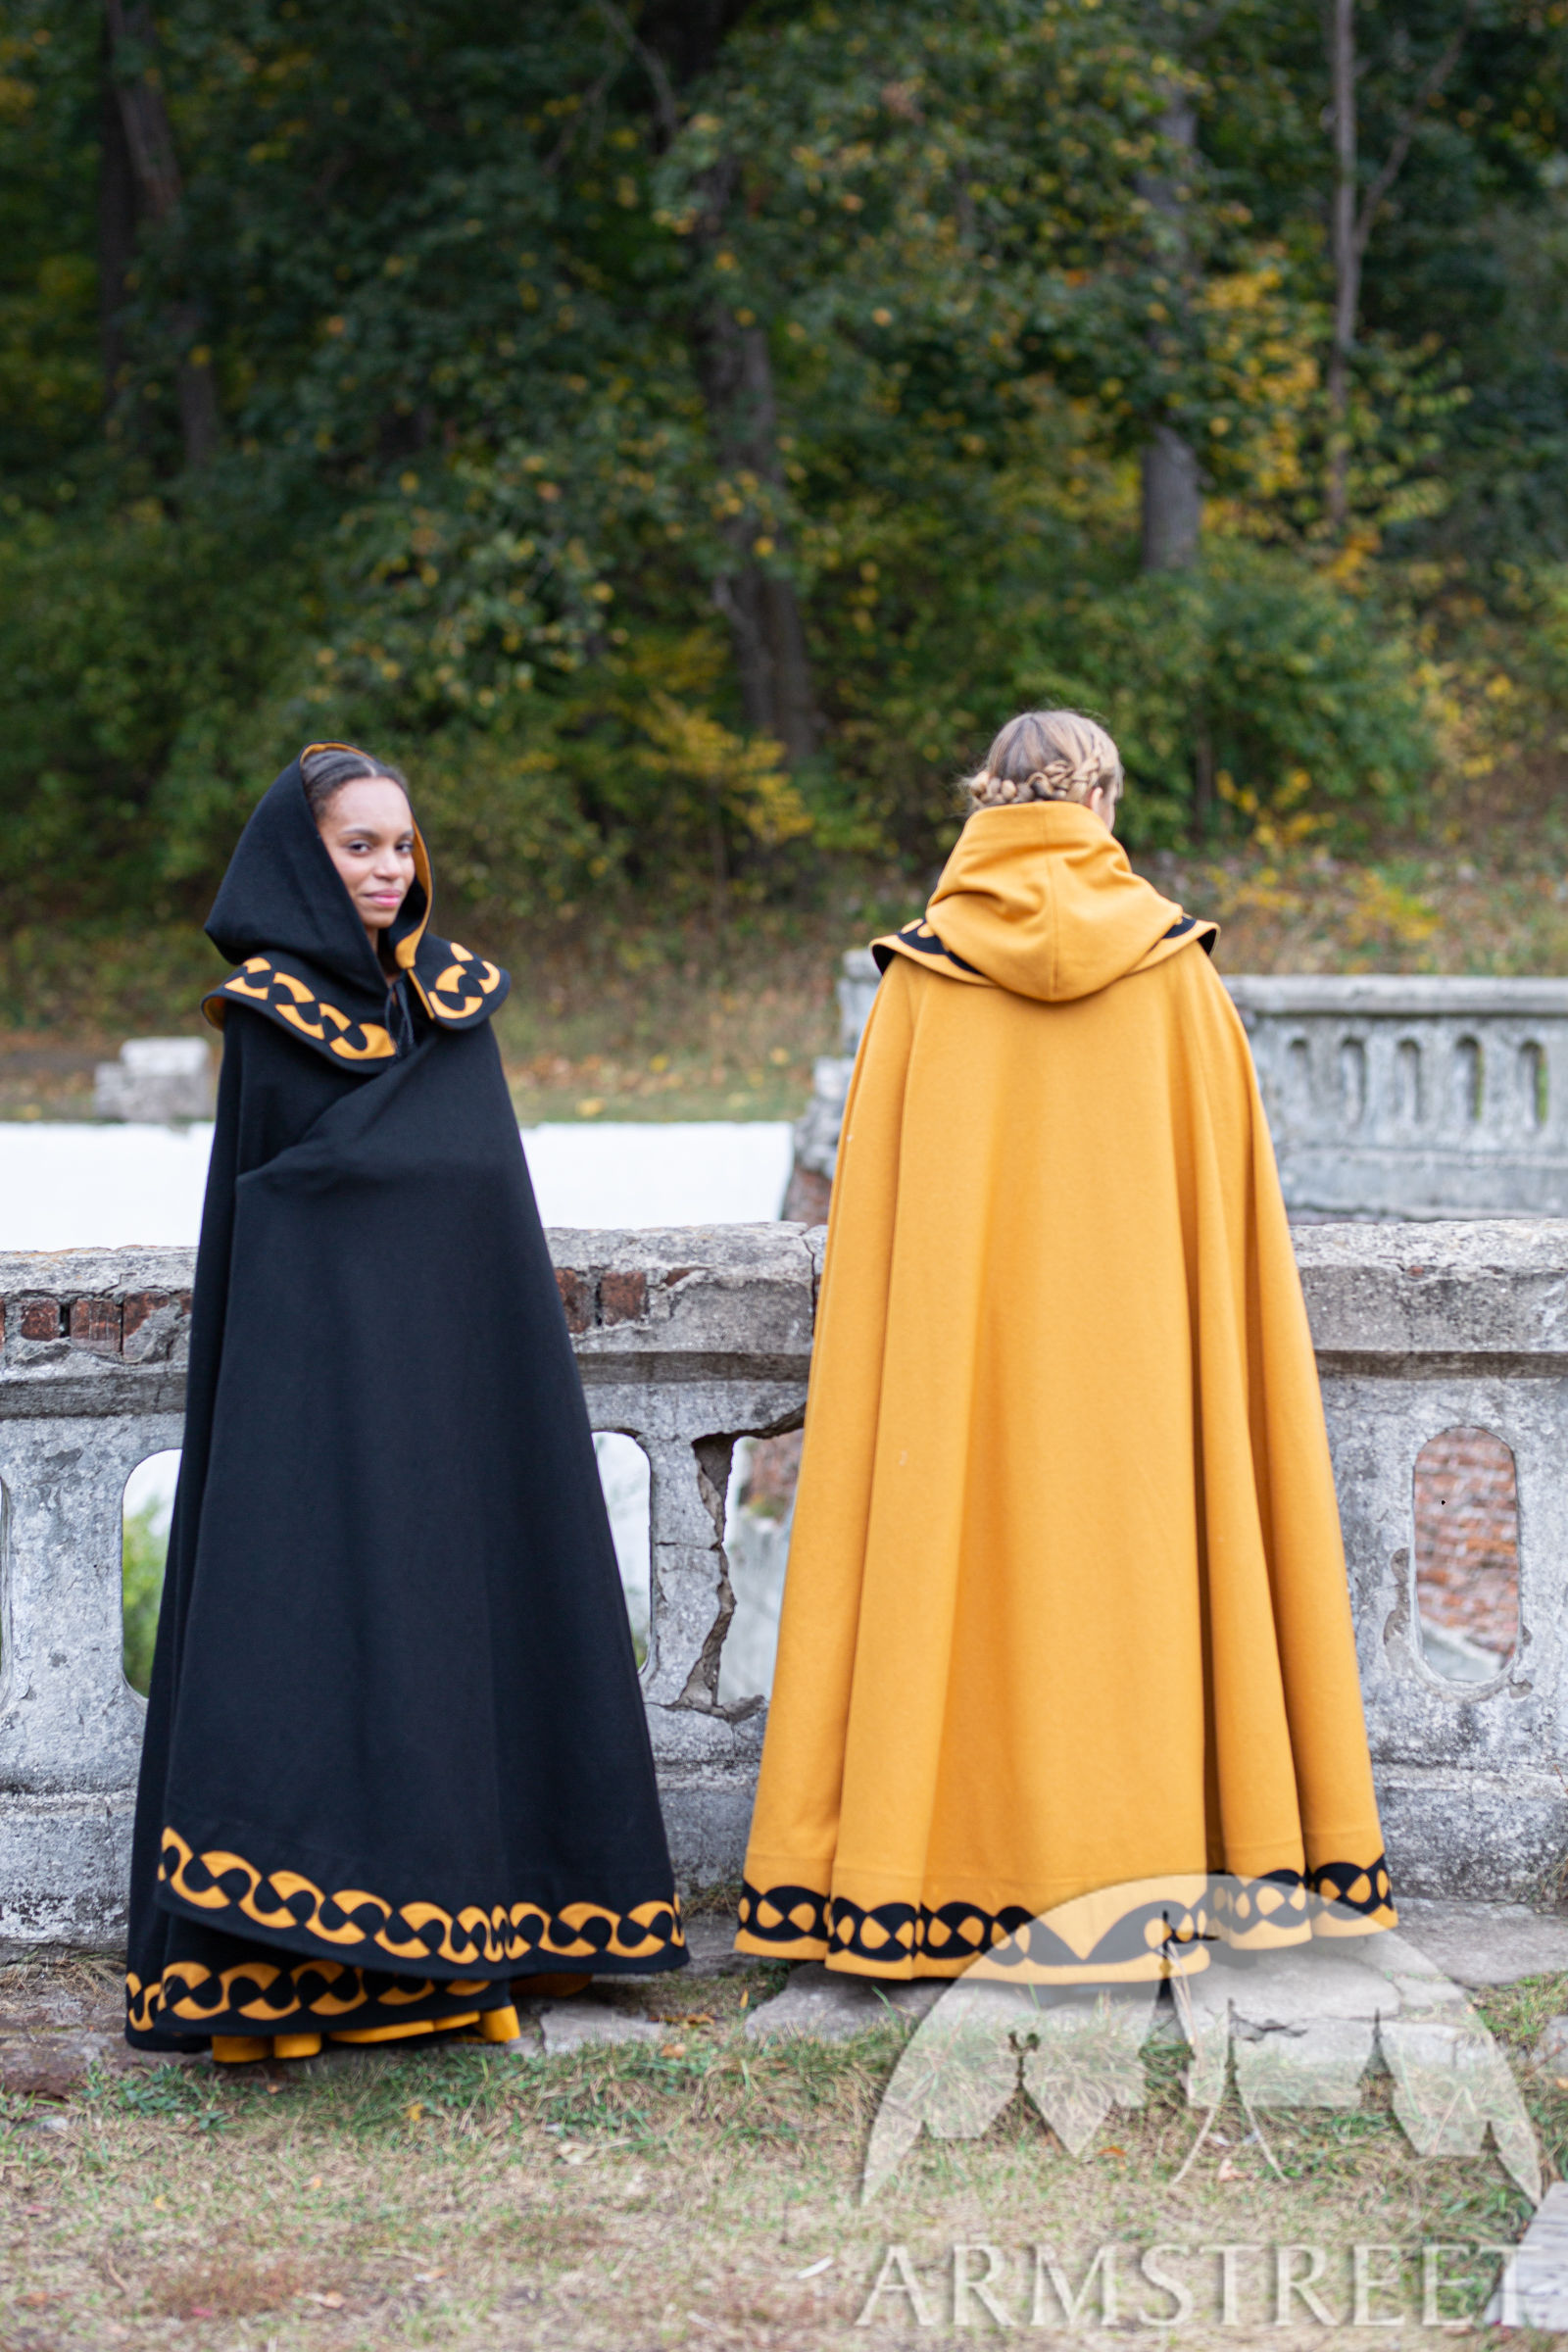 Woolen medieval cloak with cut-out designs “Townswoman”. Available in